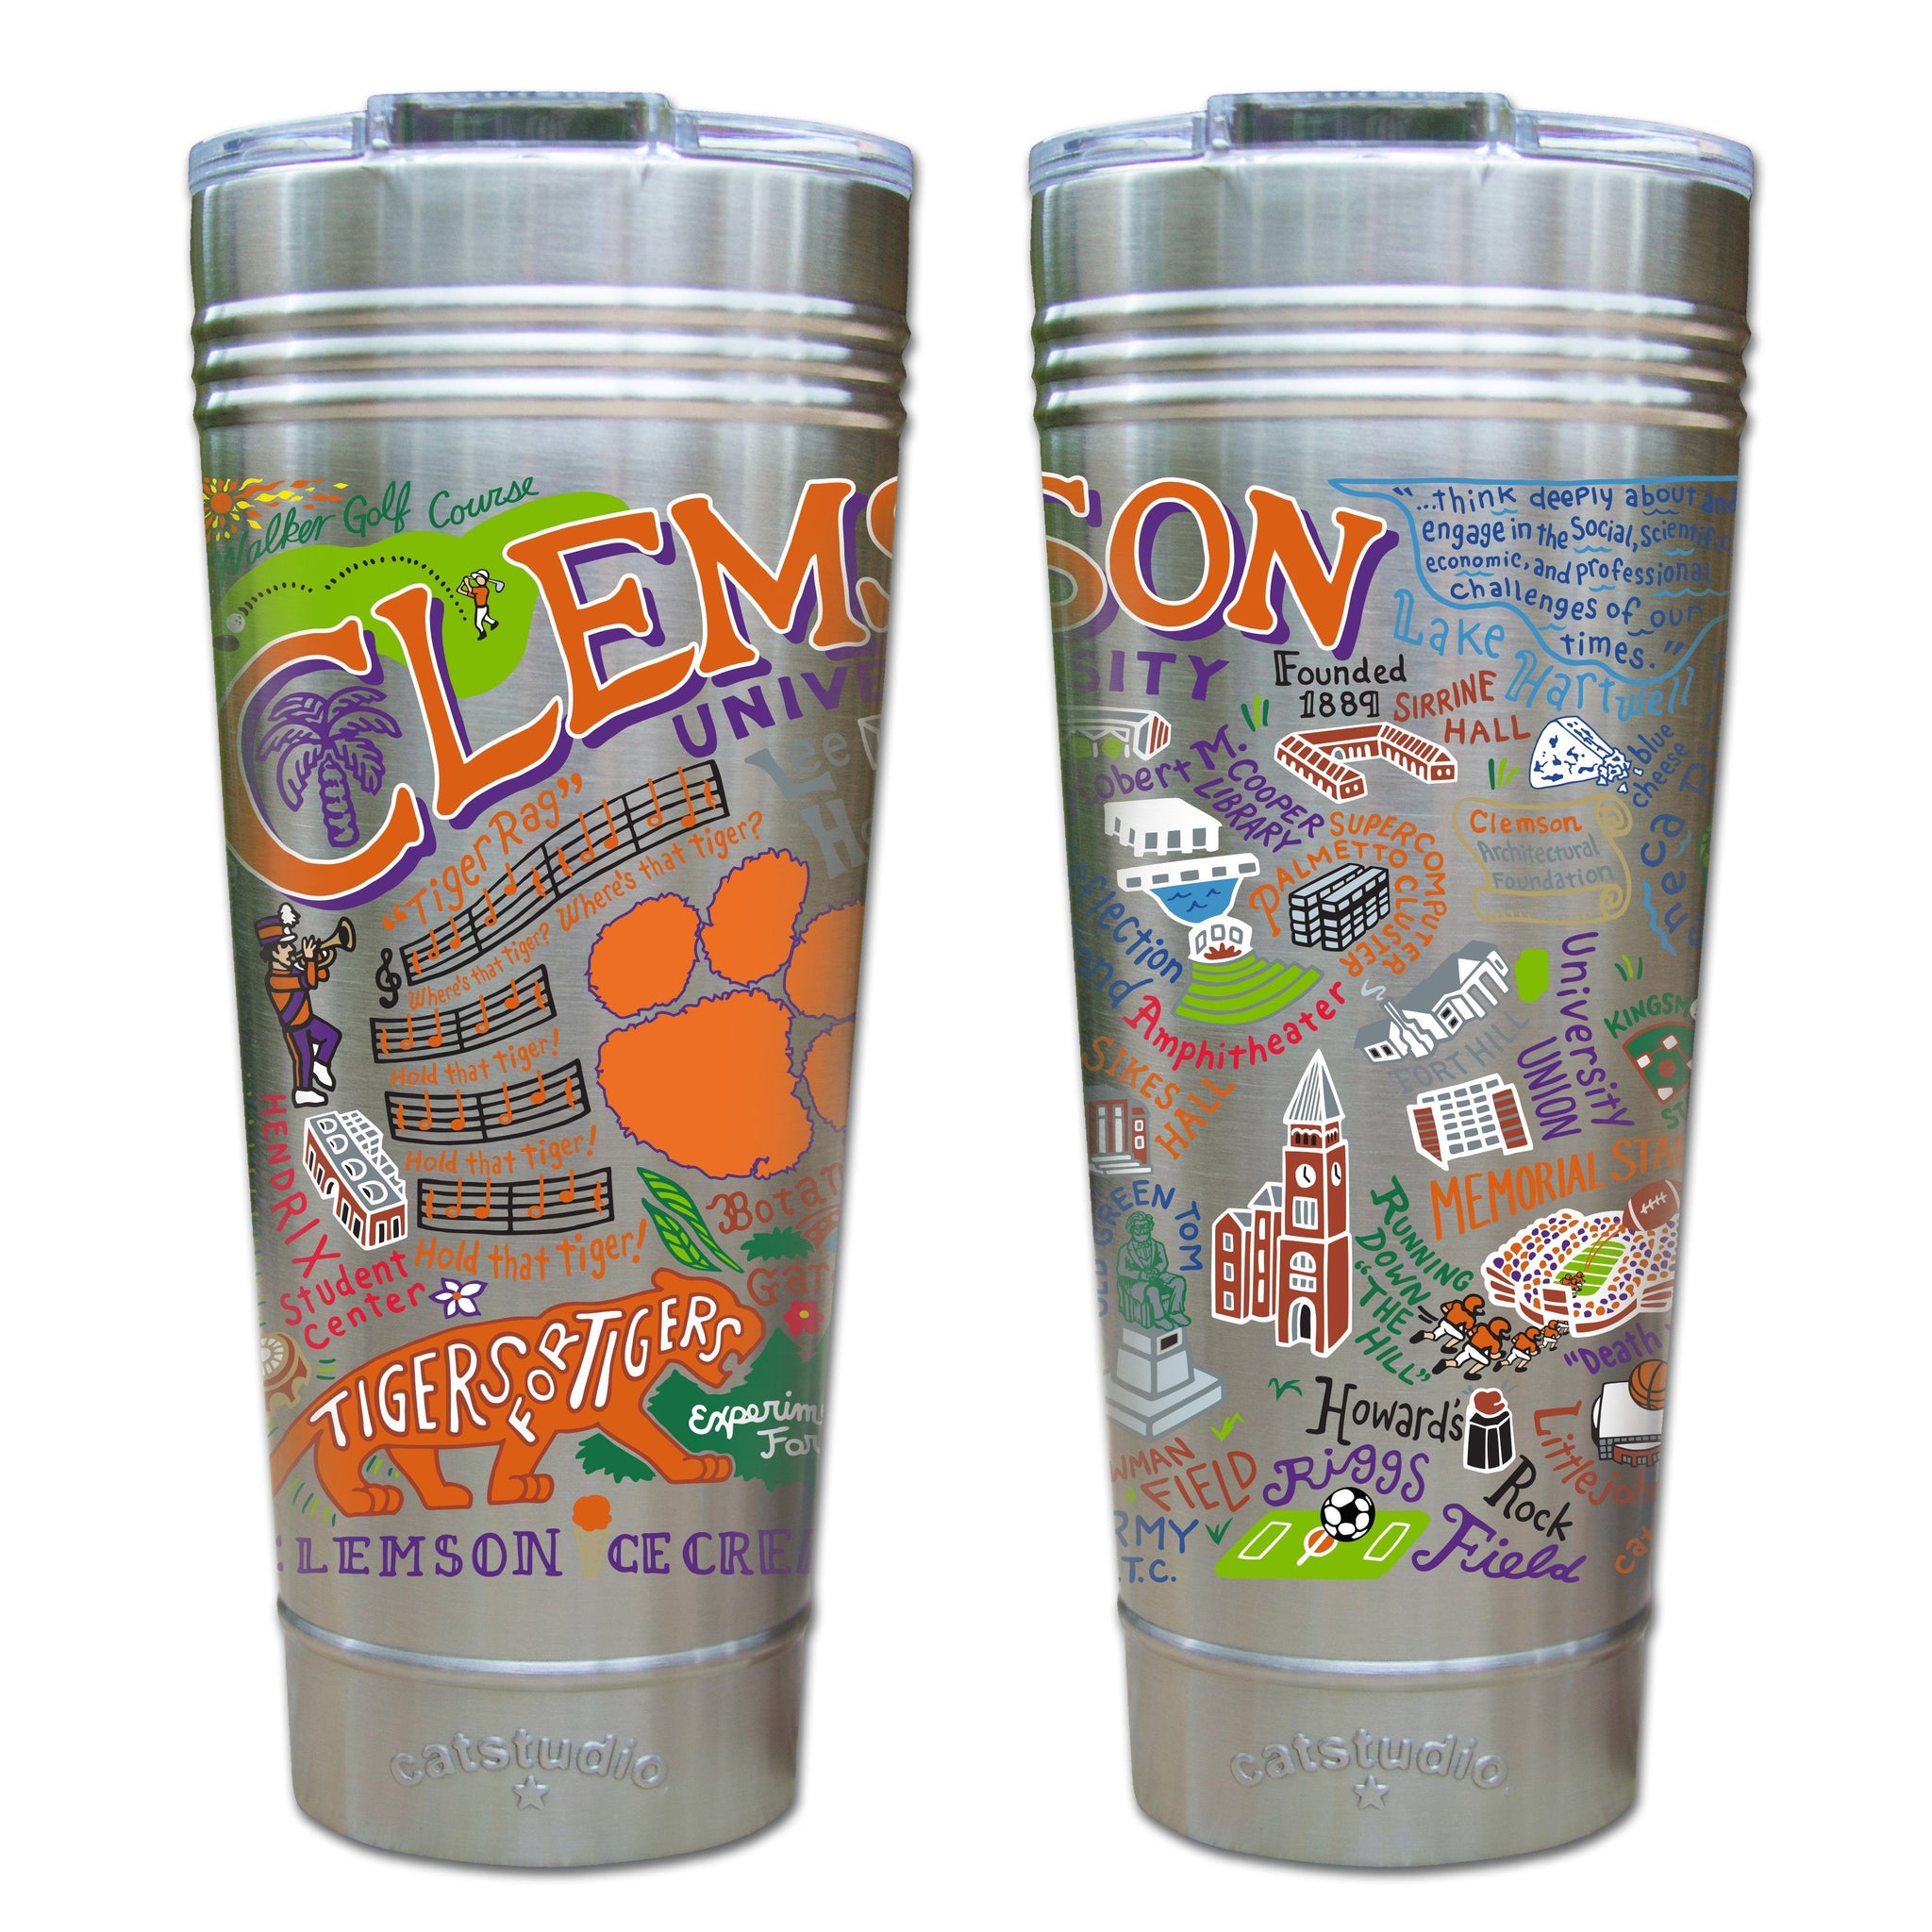 Clemson Tigers 32oz. Stainless Steel Pro Tumbler